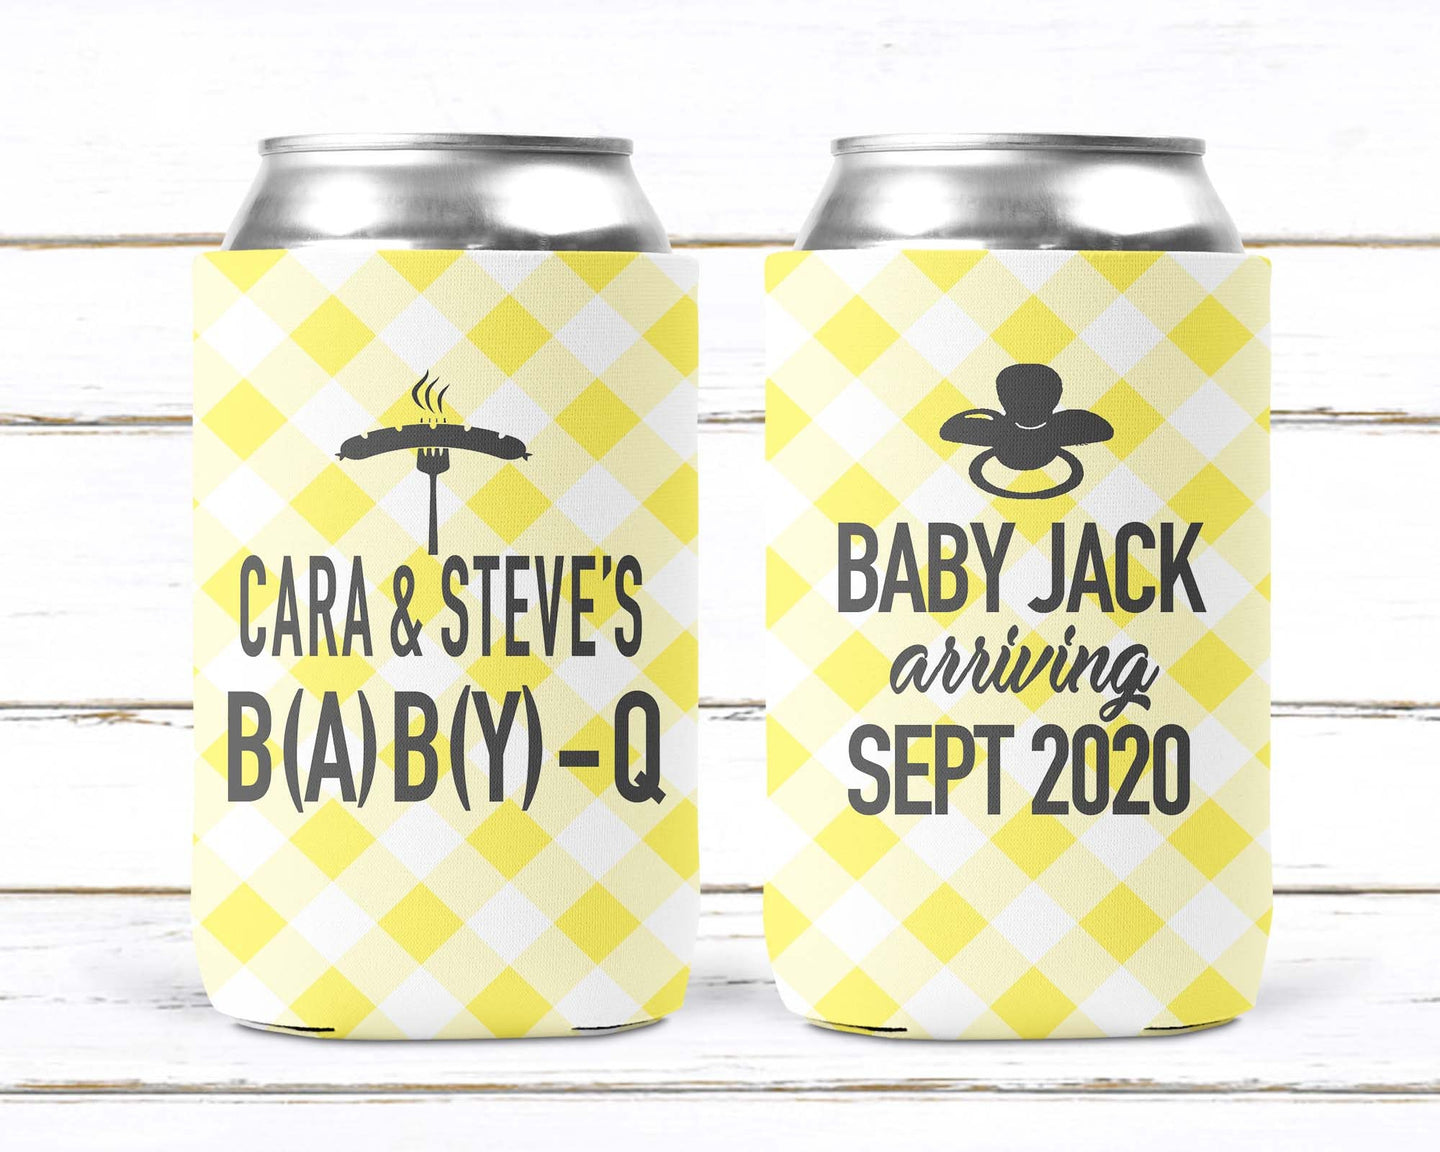 Baby Q Baby Shower. Custom Baby Shower Party! Baby Shower Favors. Gender Reveal Party Favors. Personalized Baby Q Favors! Baby Shower!